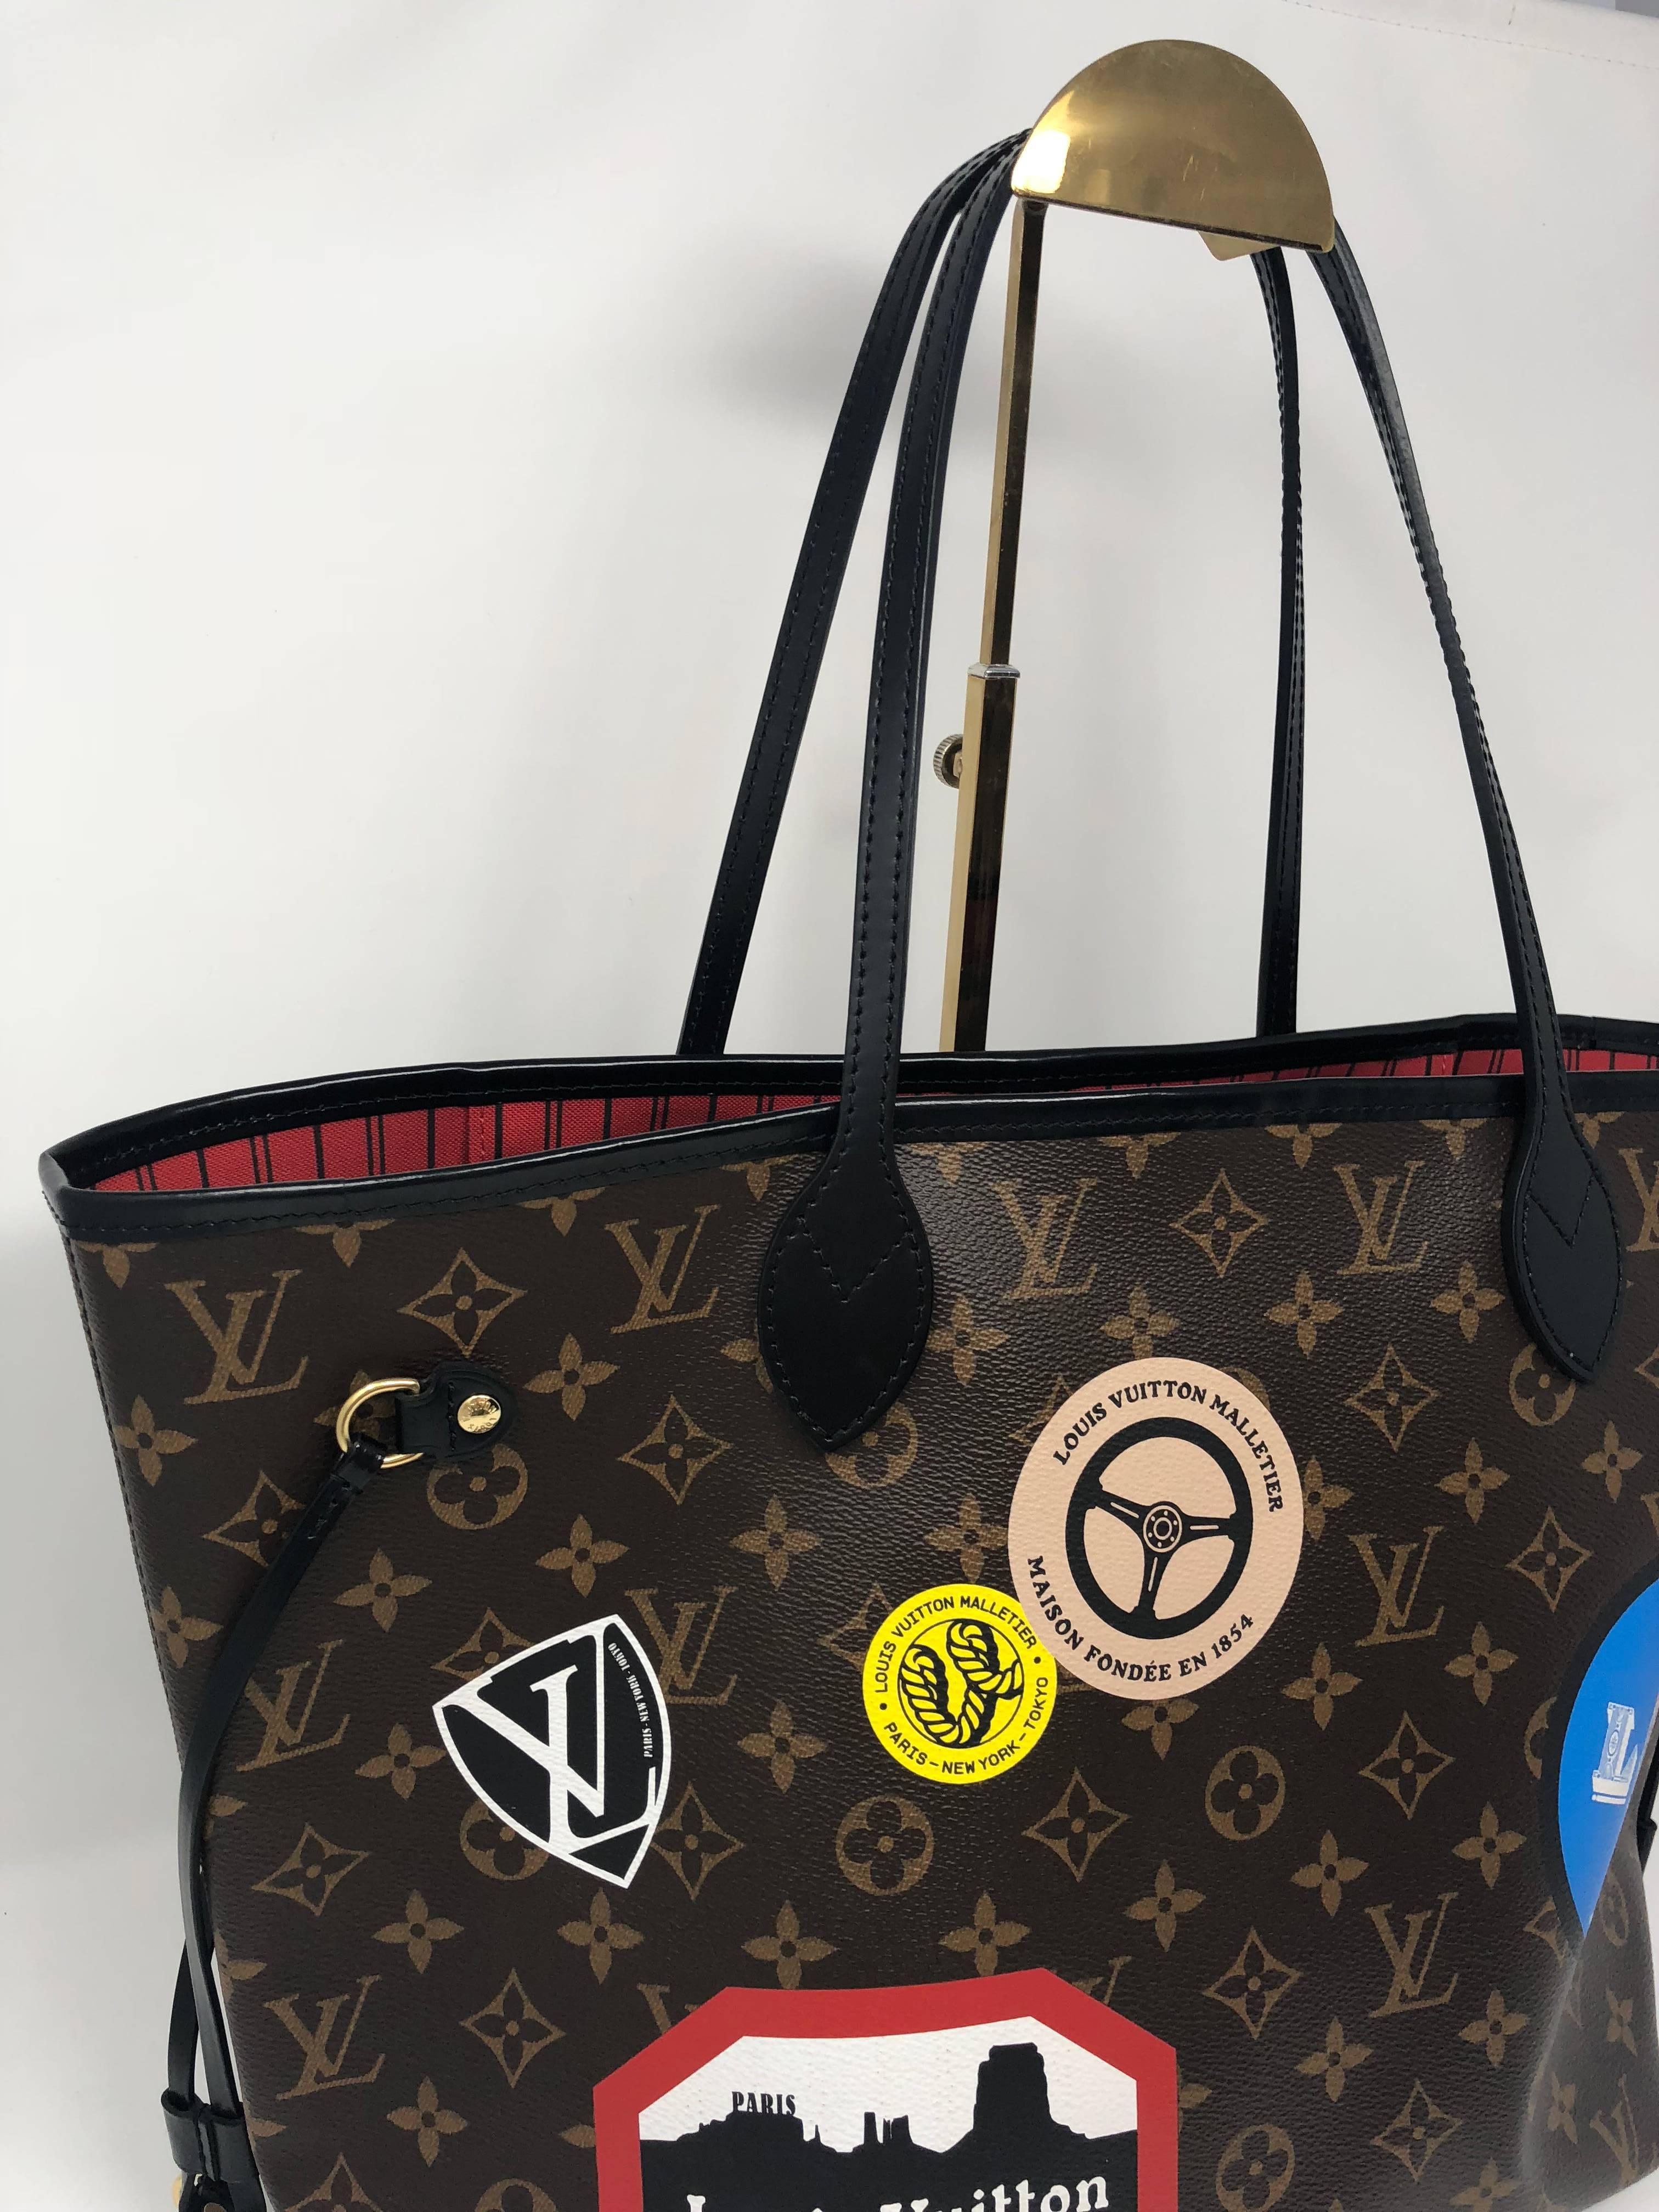 Authentic Monogram World Tour Louis Vuitton Neverfull MM from 2016 Fall/Winter Collection. Designed by Nicholas Ghesquiere.  Red interior canvas. Mint condition.